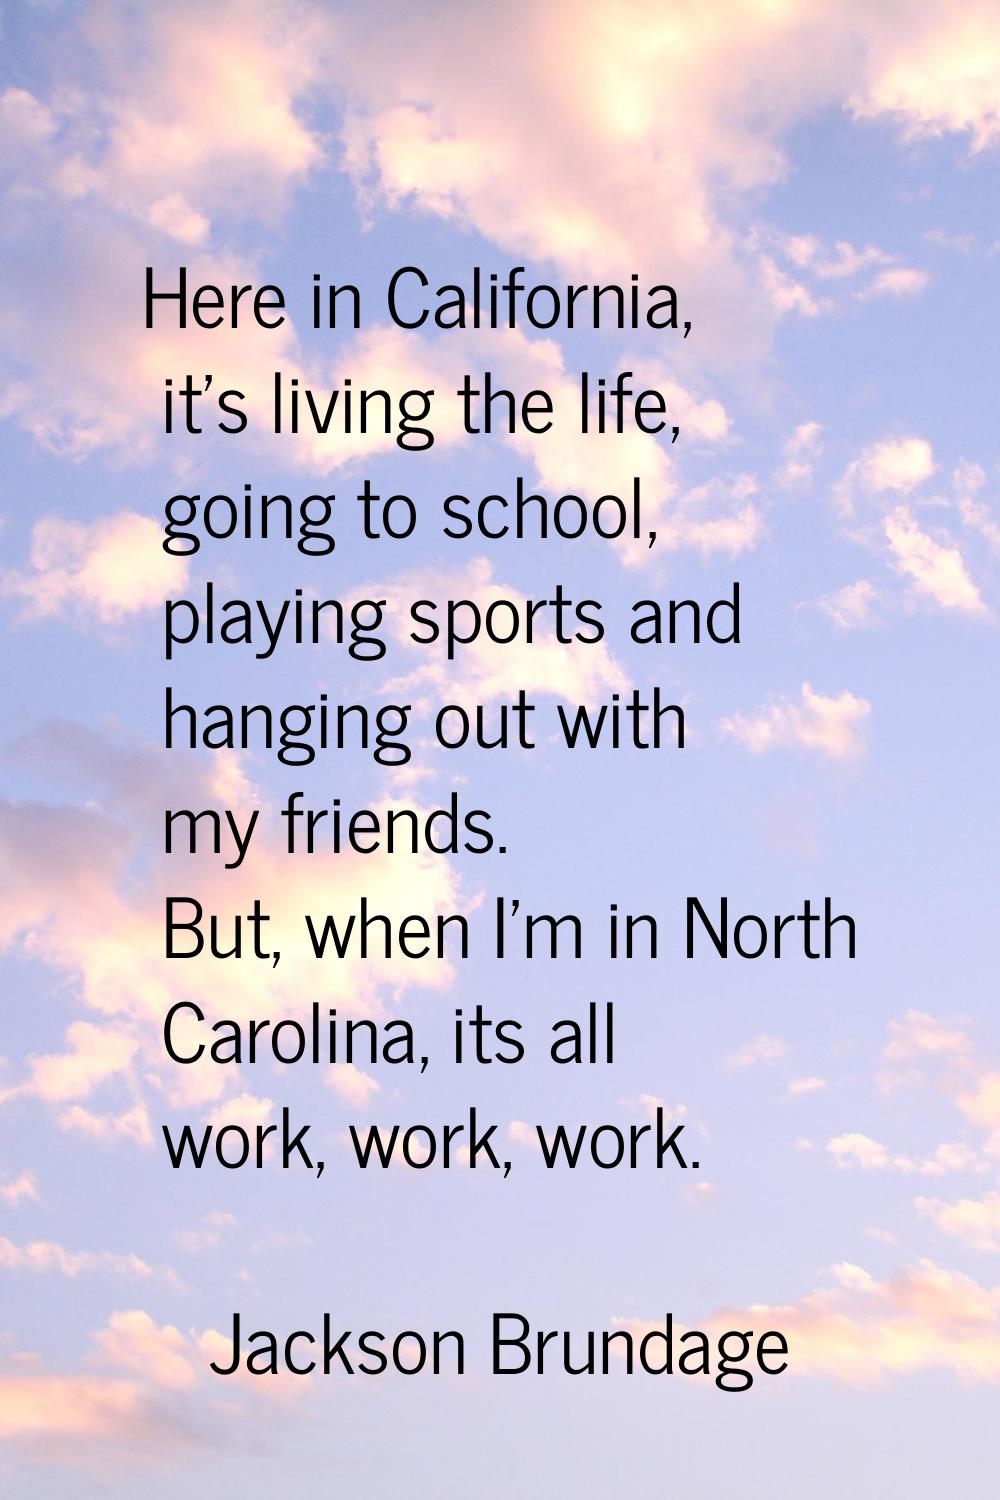 Here in California, it's living the life, going to school, playing sports and hanging out with my f